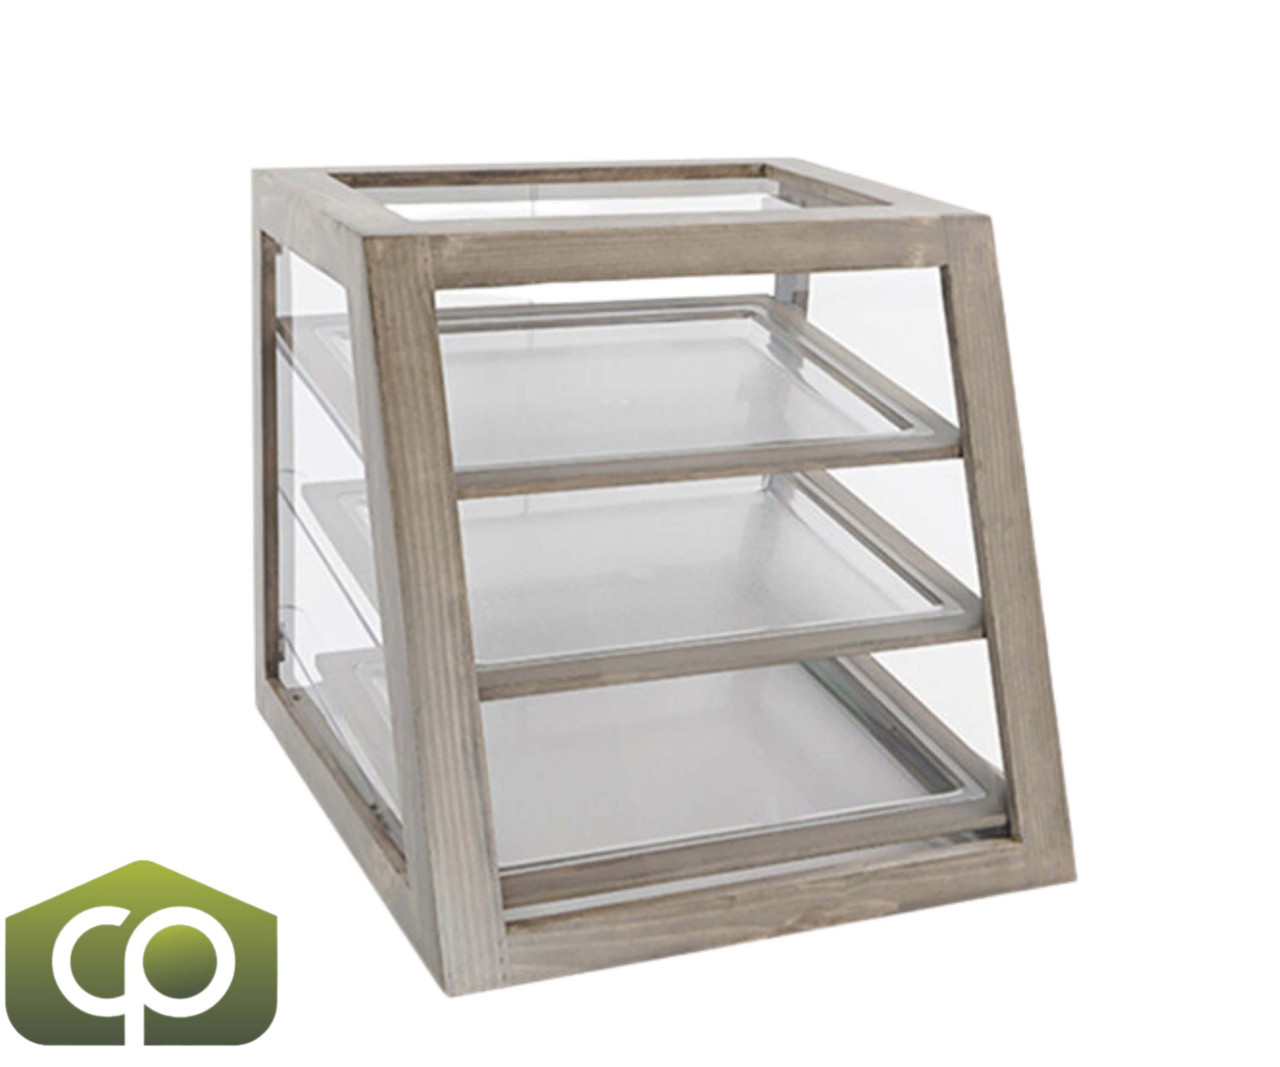 Cal-Mil Aspen 21" x 21 1/2" x 21 1/2" Slanted Attendant 3-Tier Display Case-Chicken Pieces